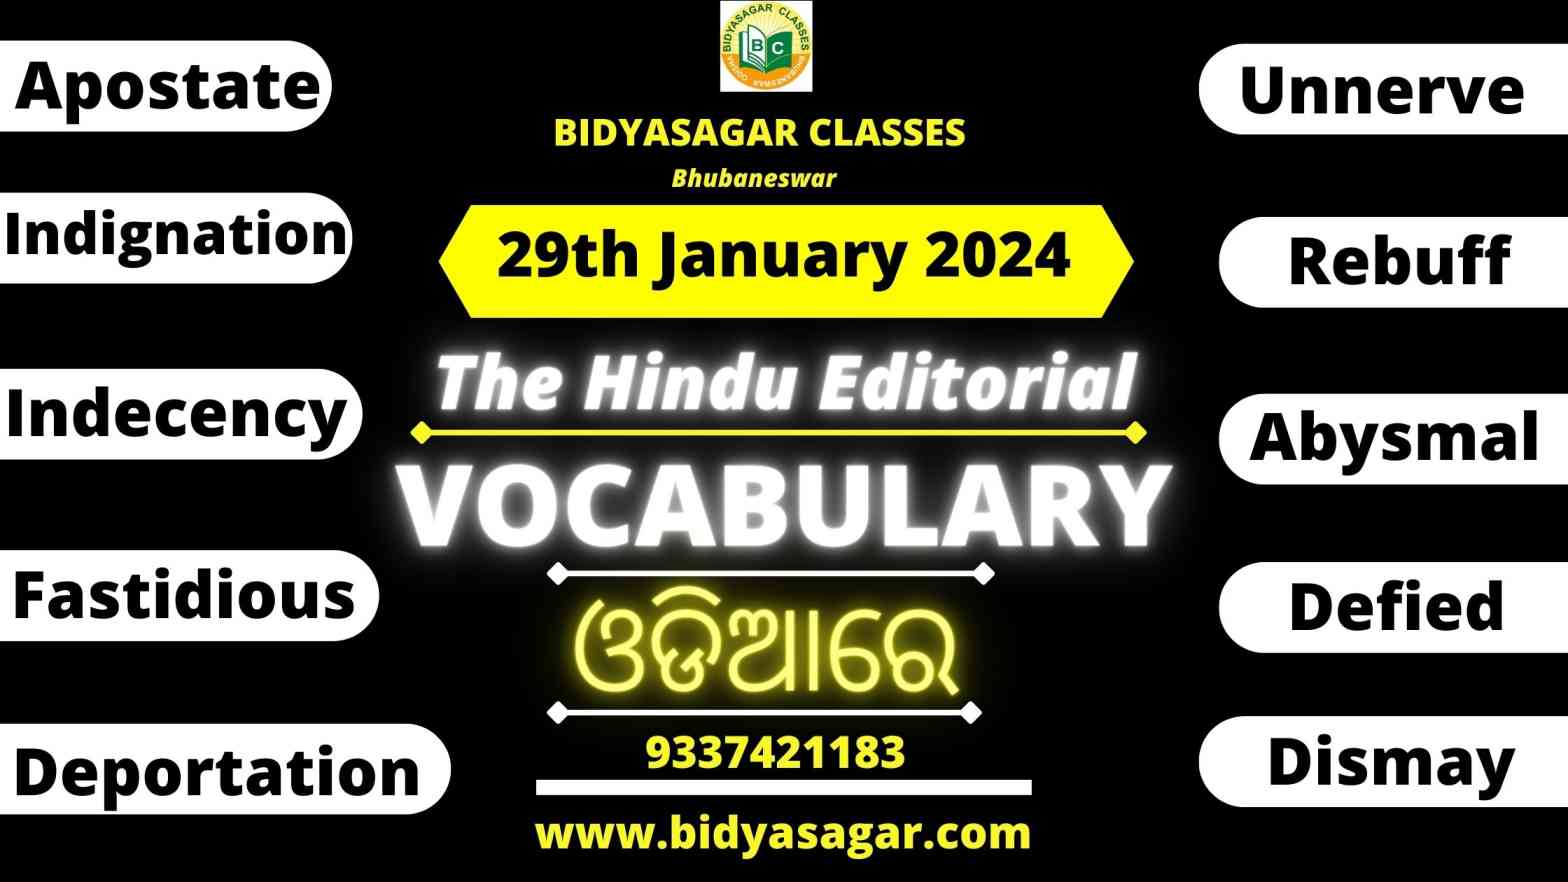 The Hindu Editorial Vocabulary of 29th January 2024